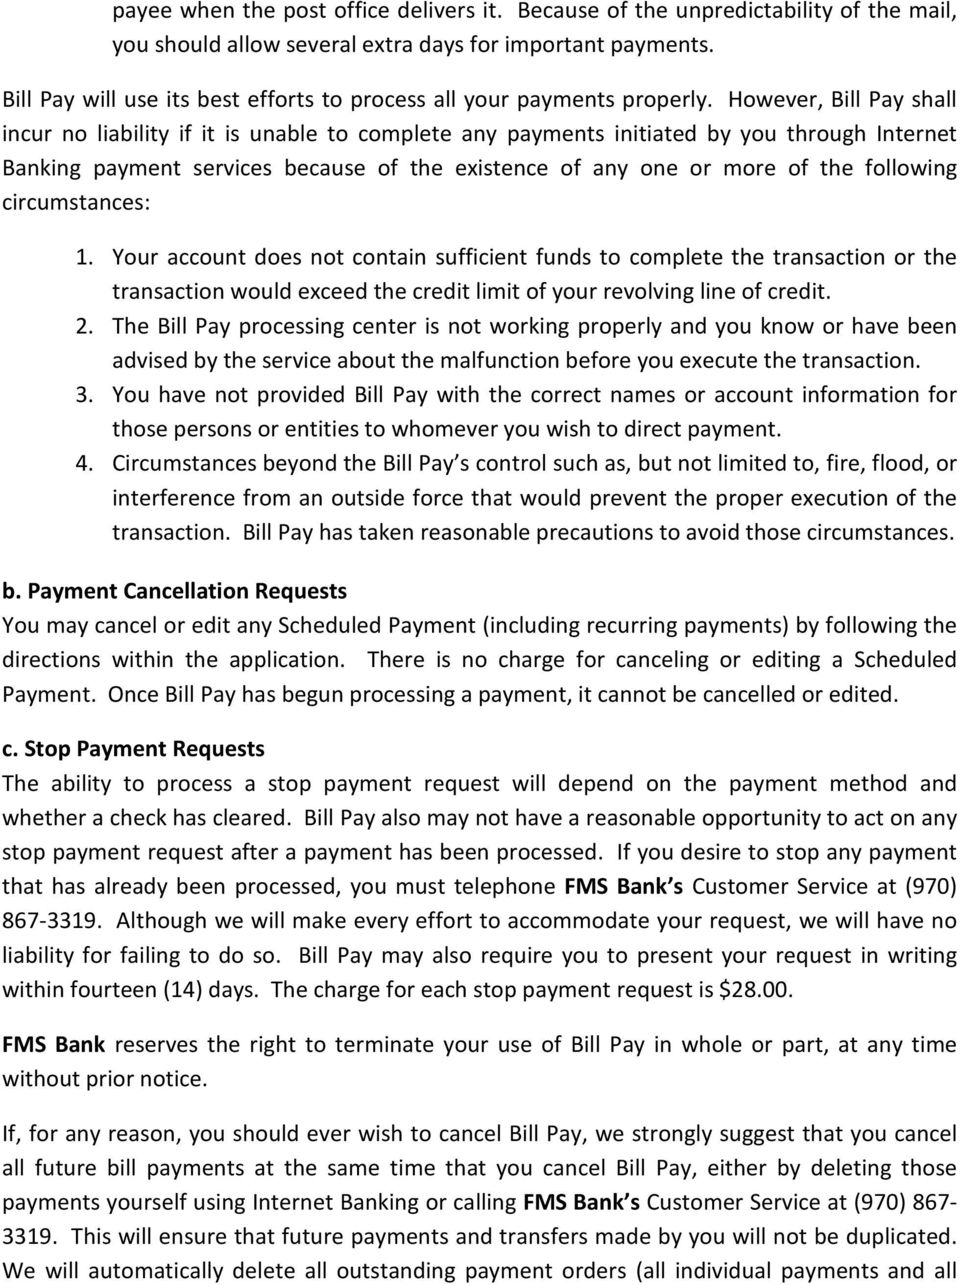 However, Bill Pay shall incur no liability if it is unable to complete any payments initiated by you through Internet Banking payment services because of the existence of any one or more of the